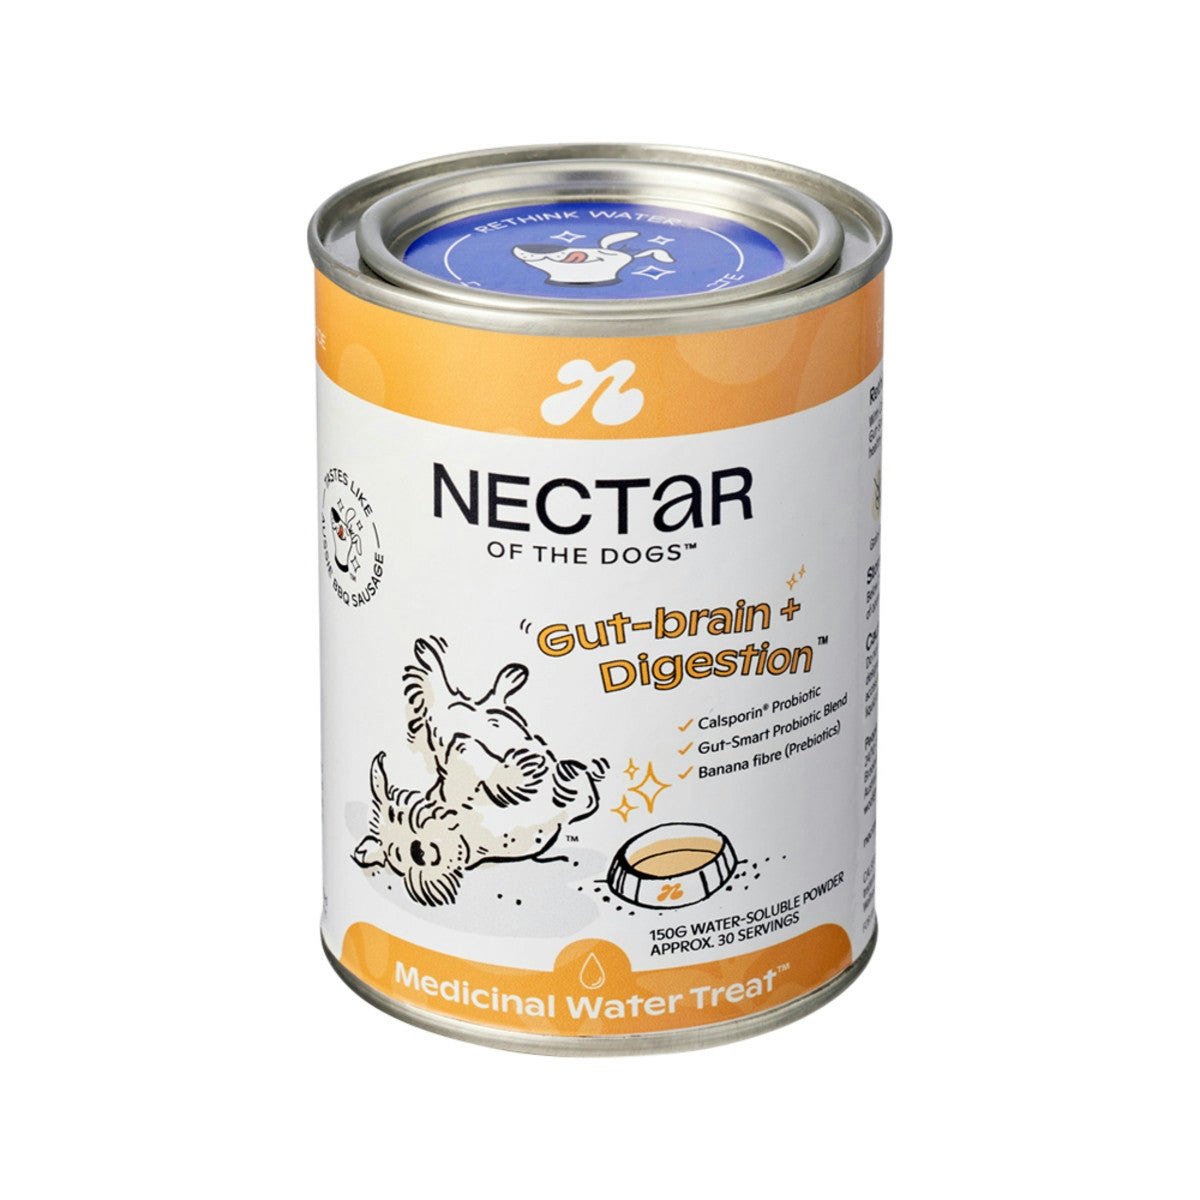 image of Nectar Of The Dogs Gut-Brain + Digestion (Medicinal Water Treat) Soluble Powder 150g on white background